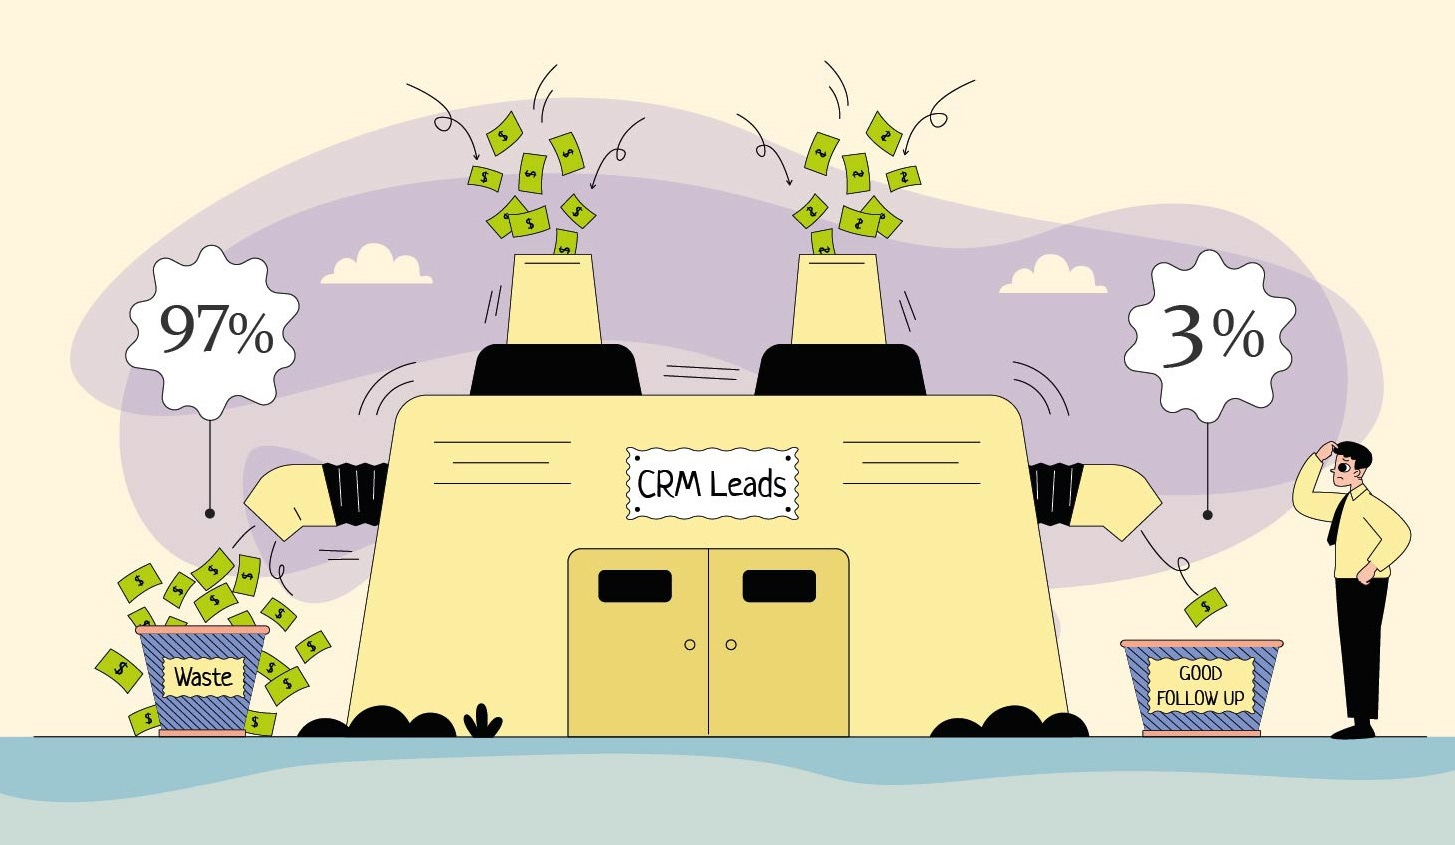 An agent stands confused by 97% of CRM leads going to waste, only 3% getting good follow-up, 